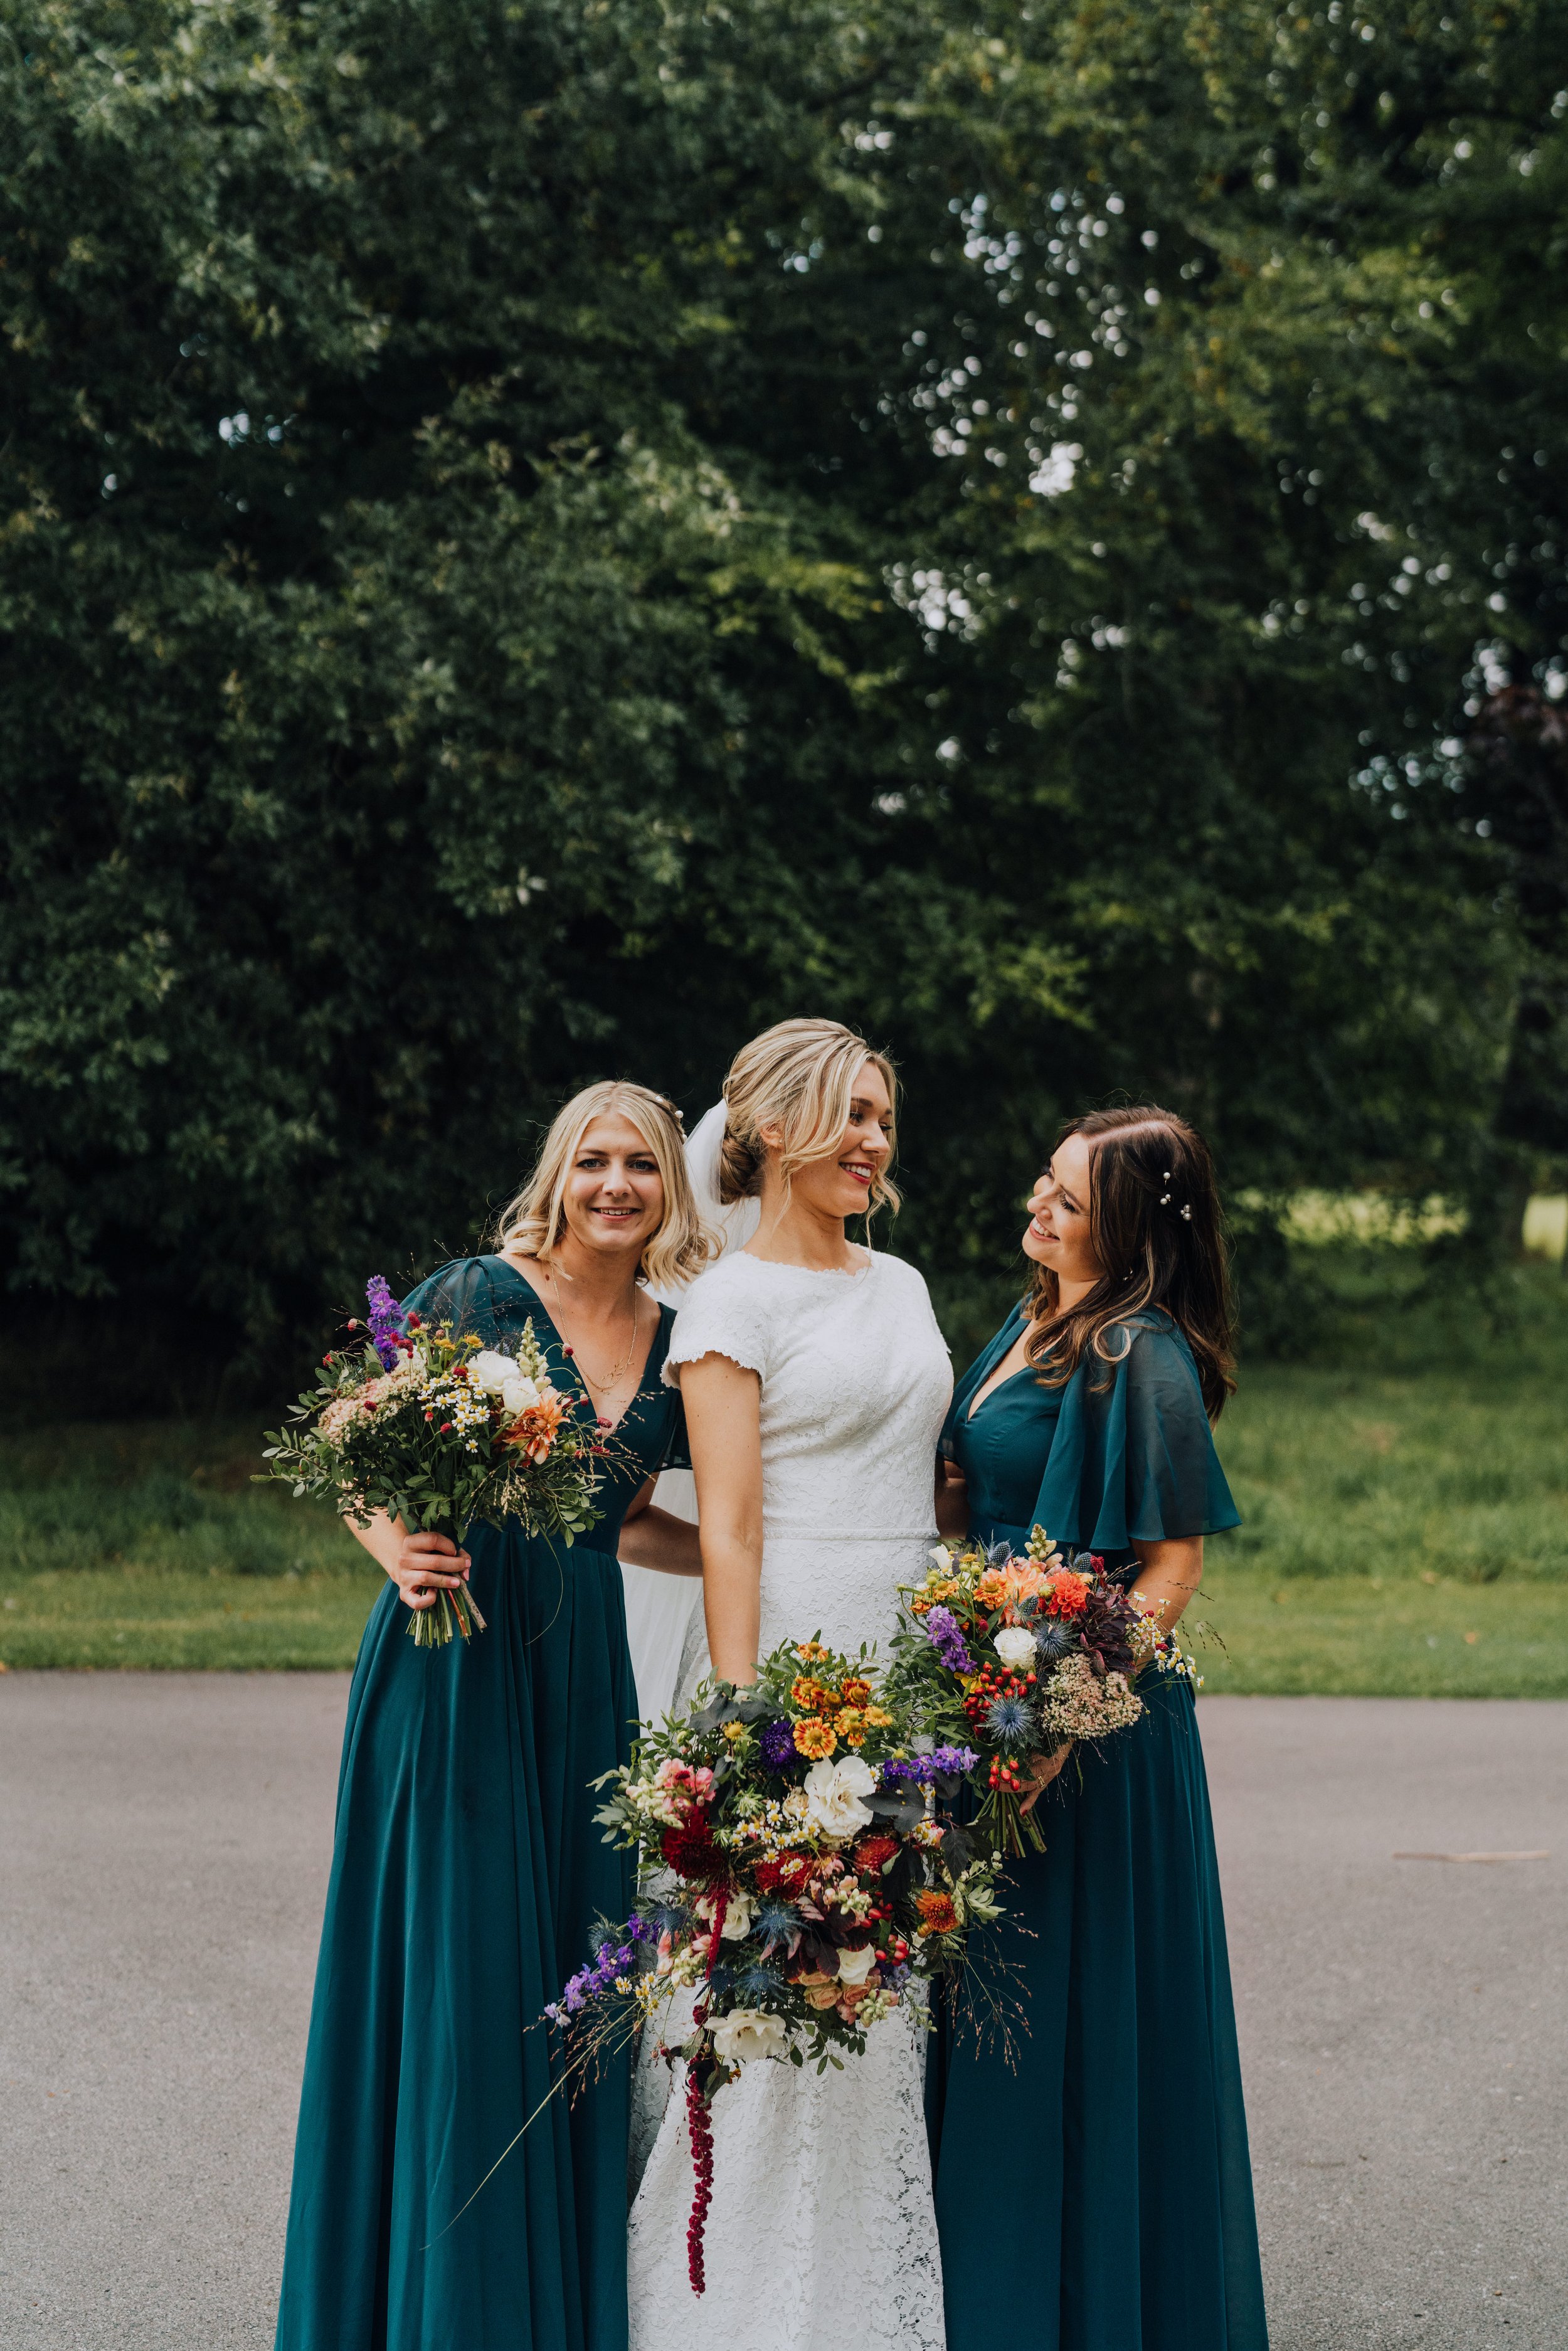 Bride and her bridesmaids with their bouquets